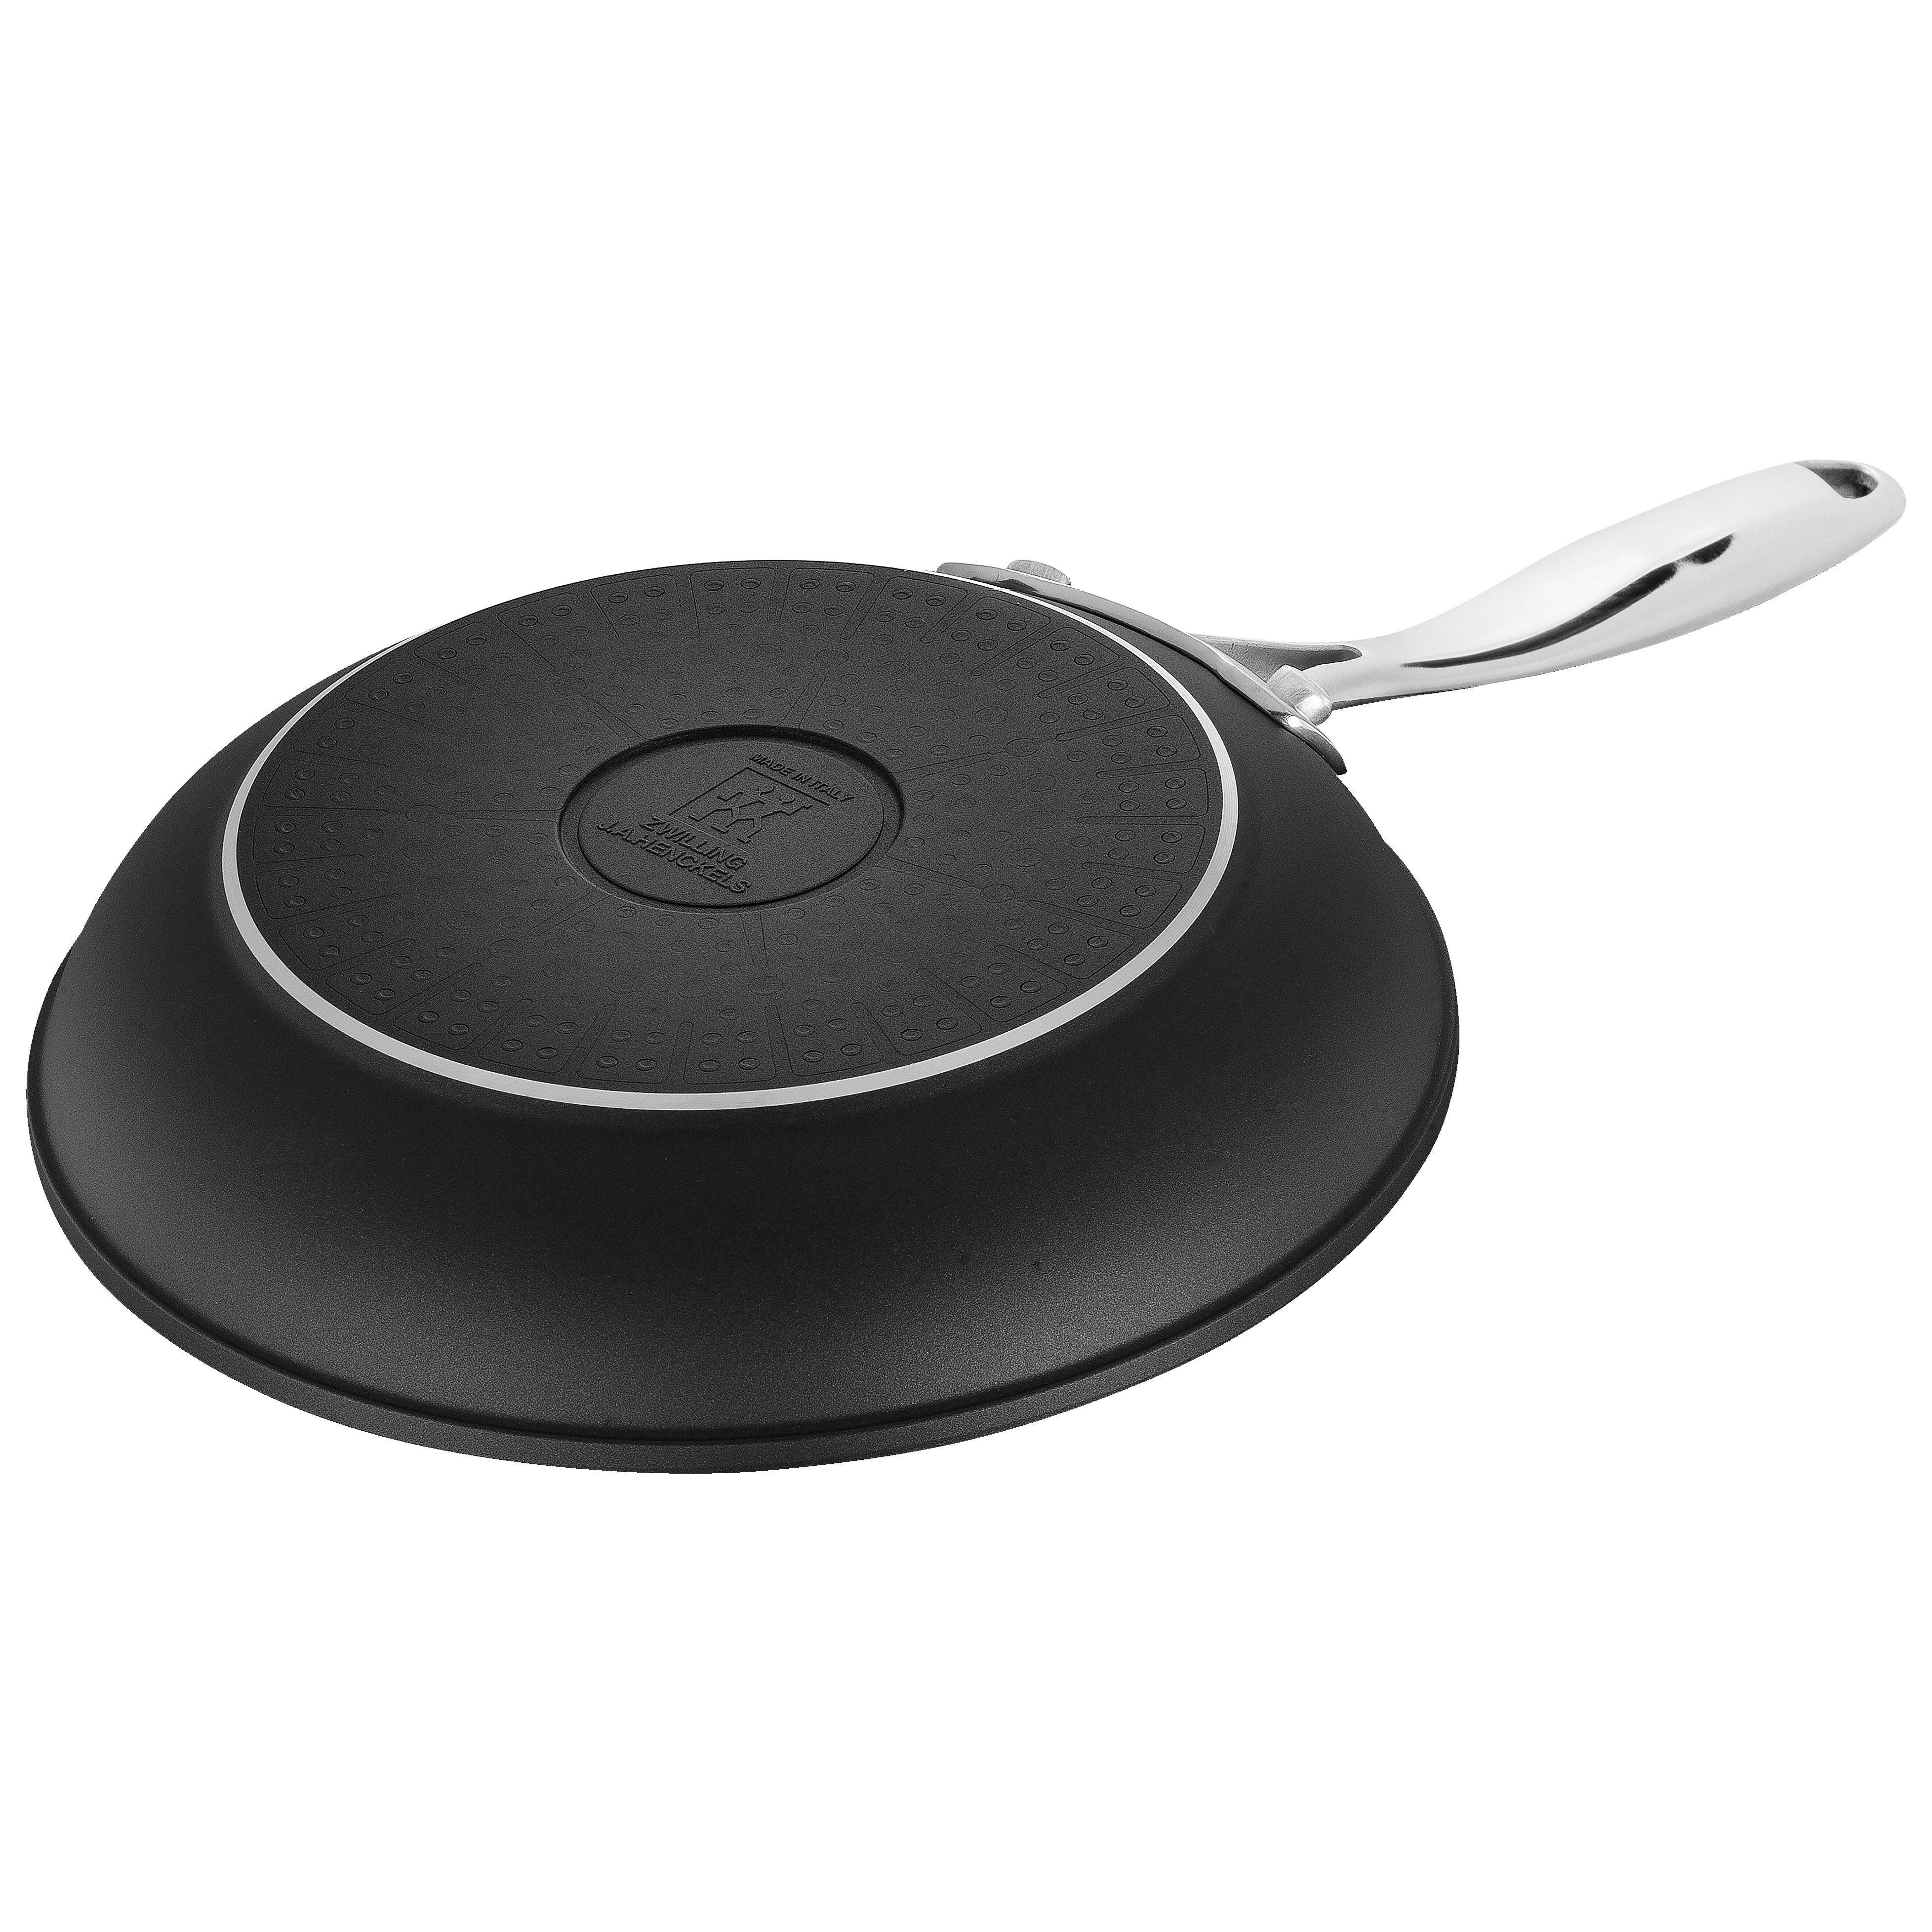 Zwilling J.A.Henckels Forte Frying pan Non Stick 24 cm Aluminium  66569-241-0 for sale